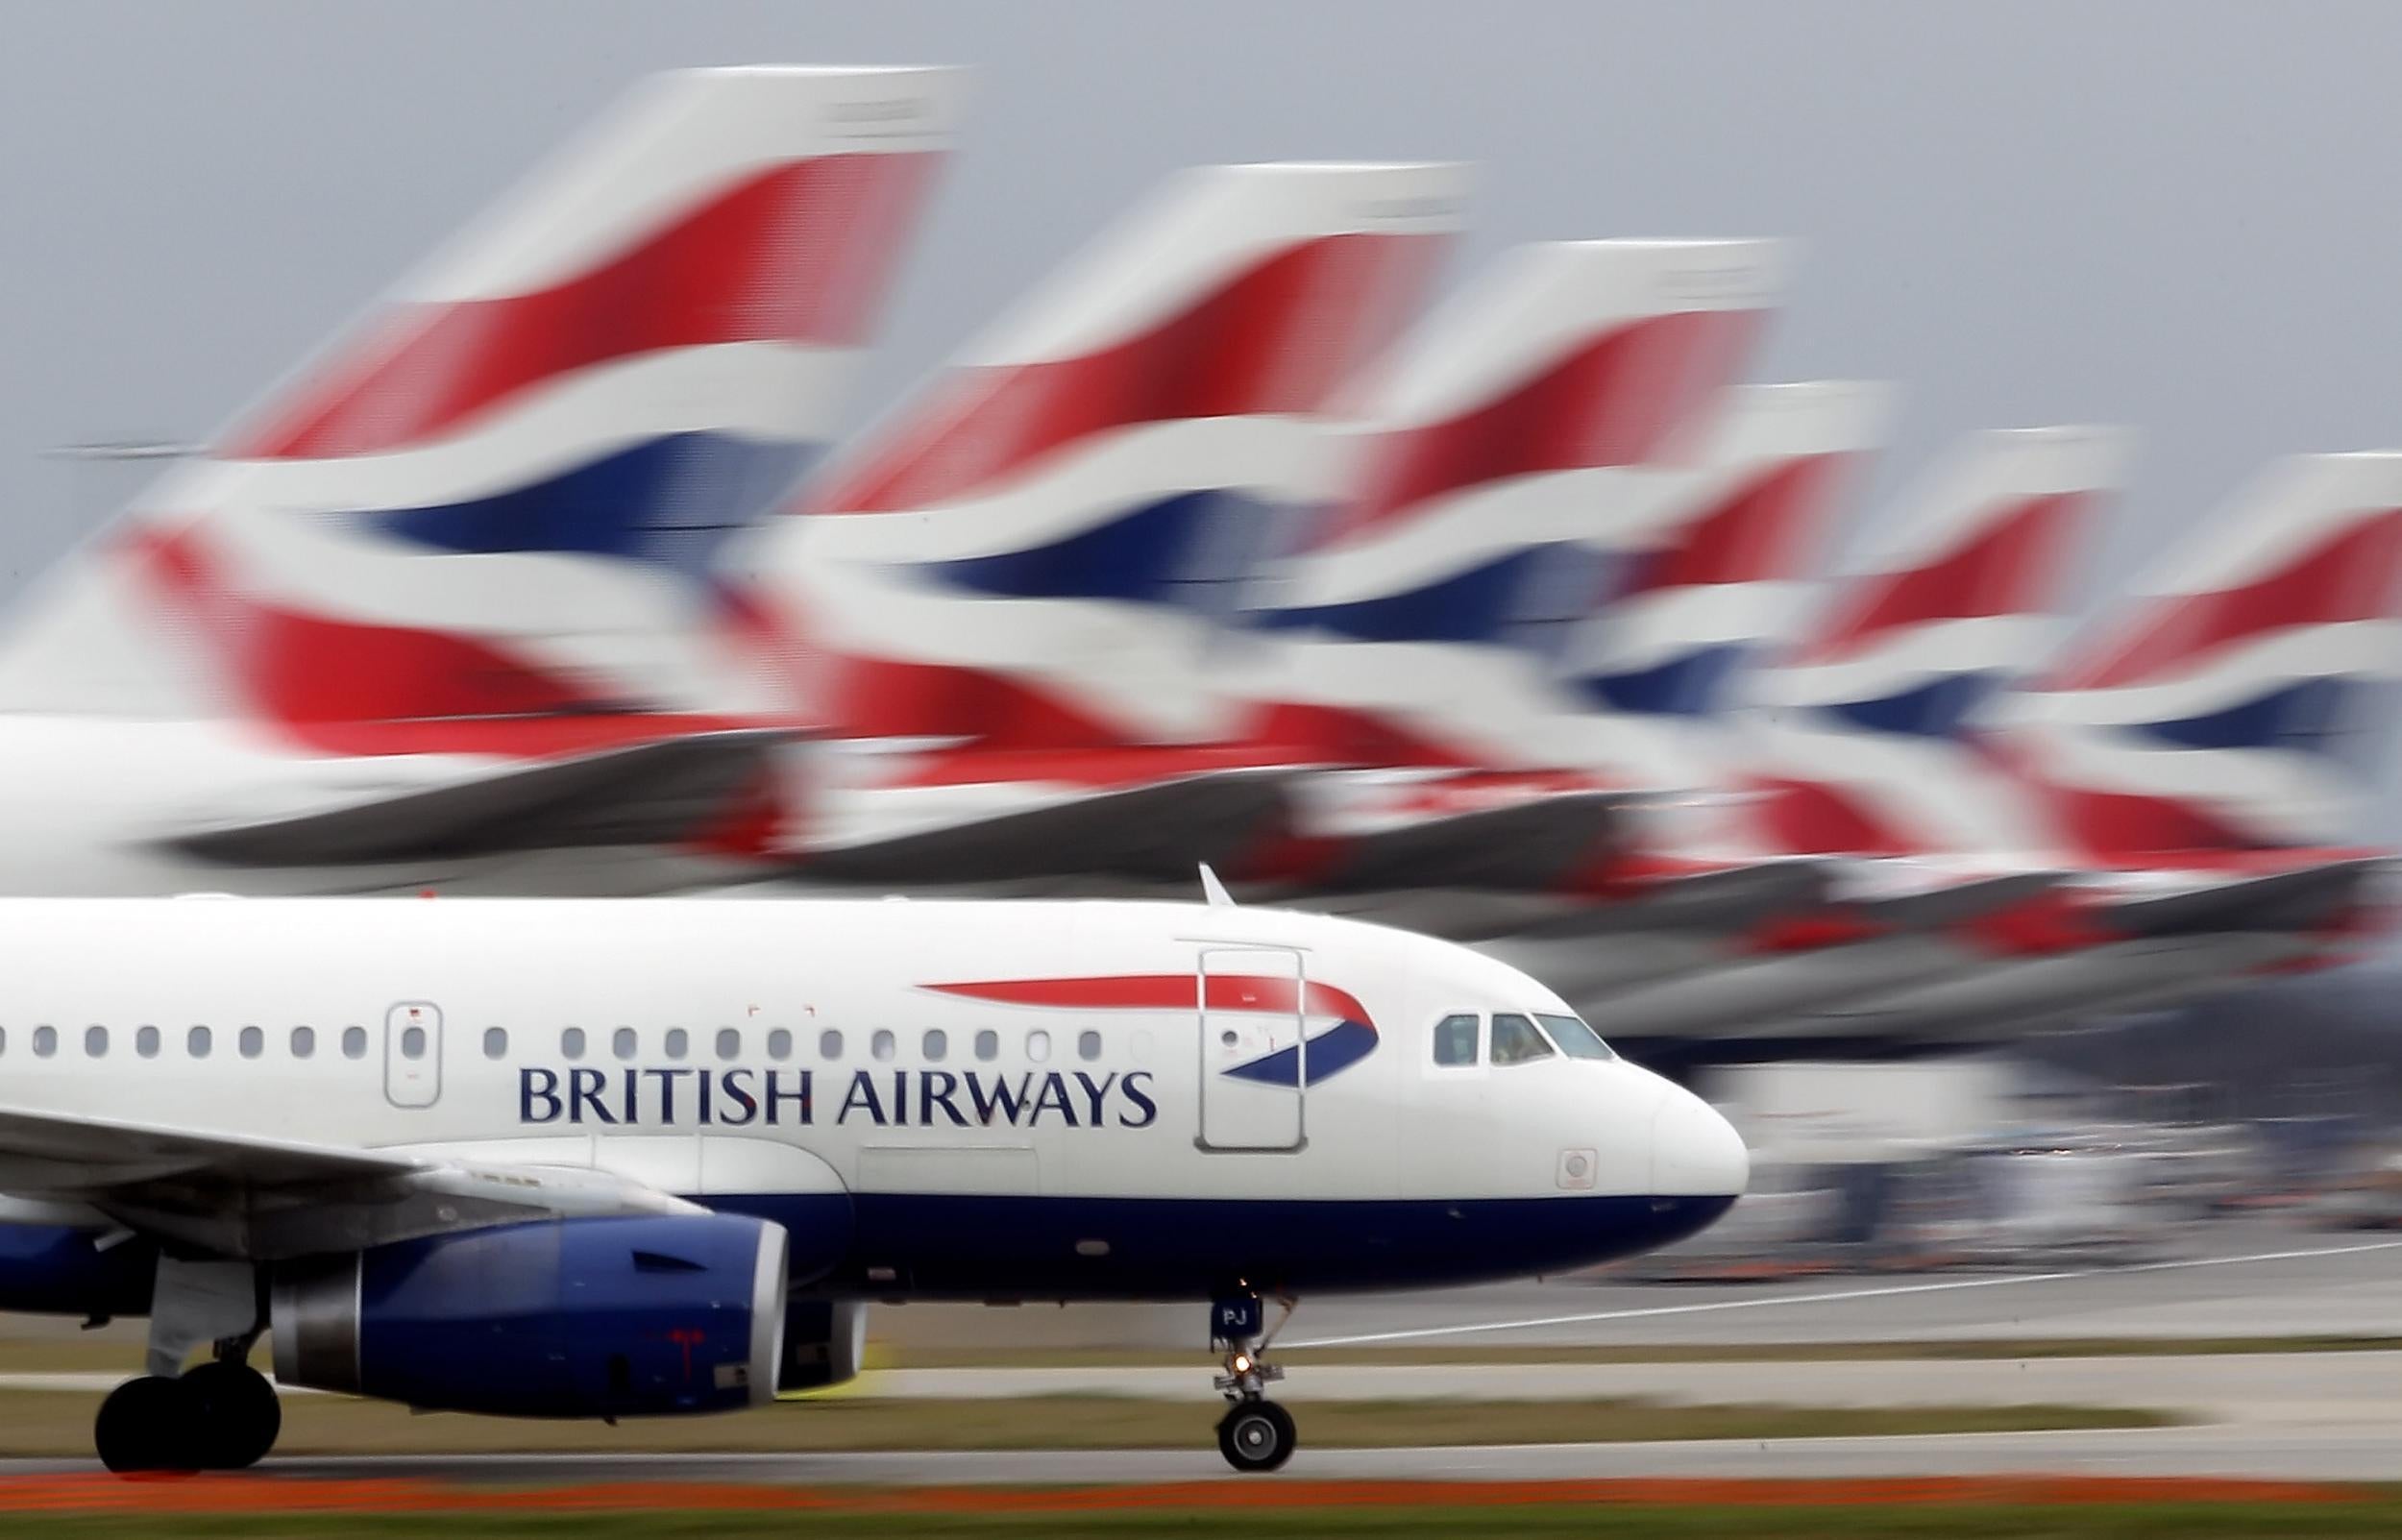 British Airways said it could consider scrapping free food for long-haul flights passengers